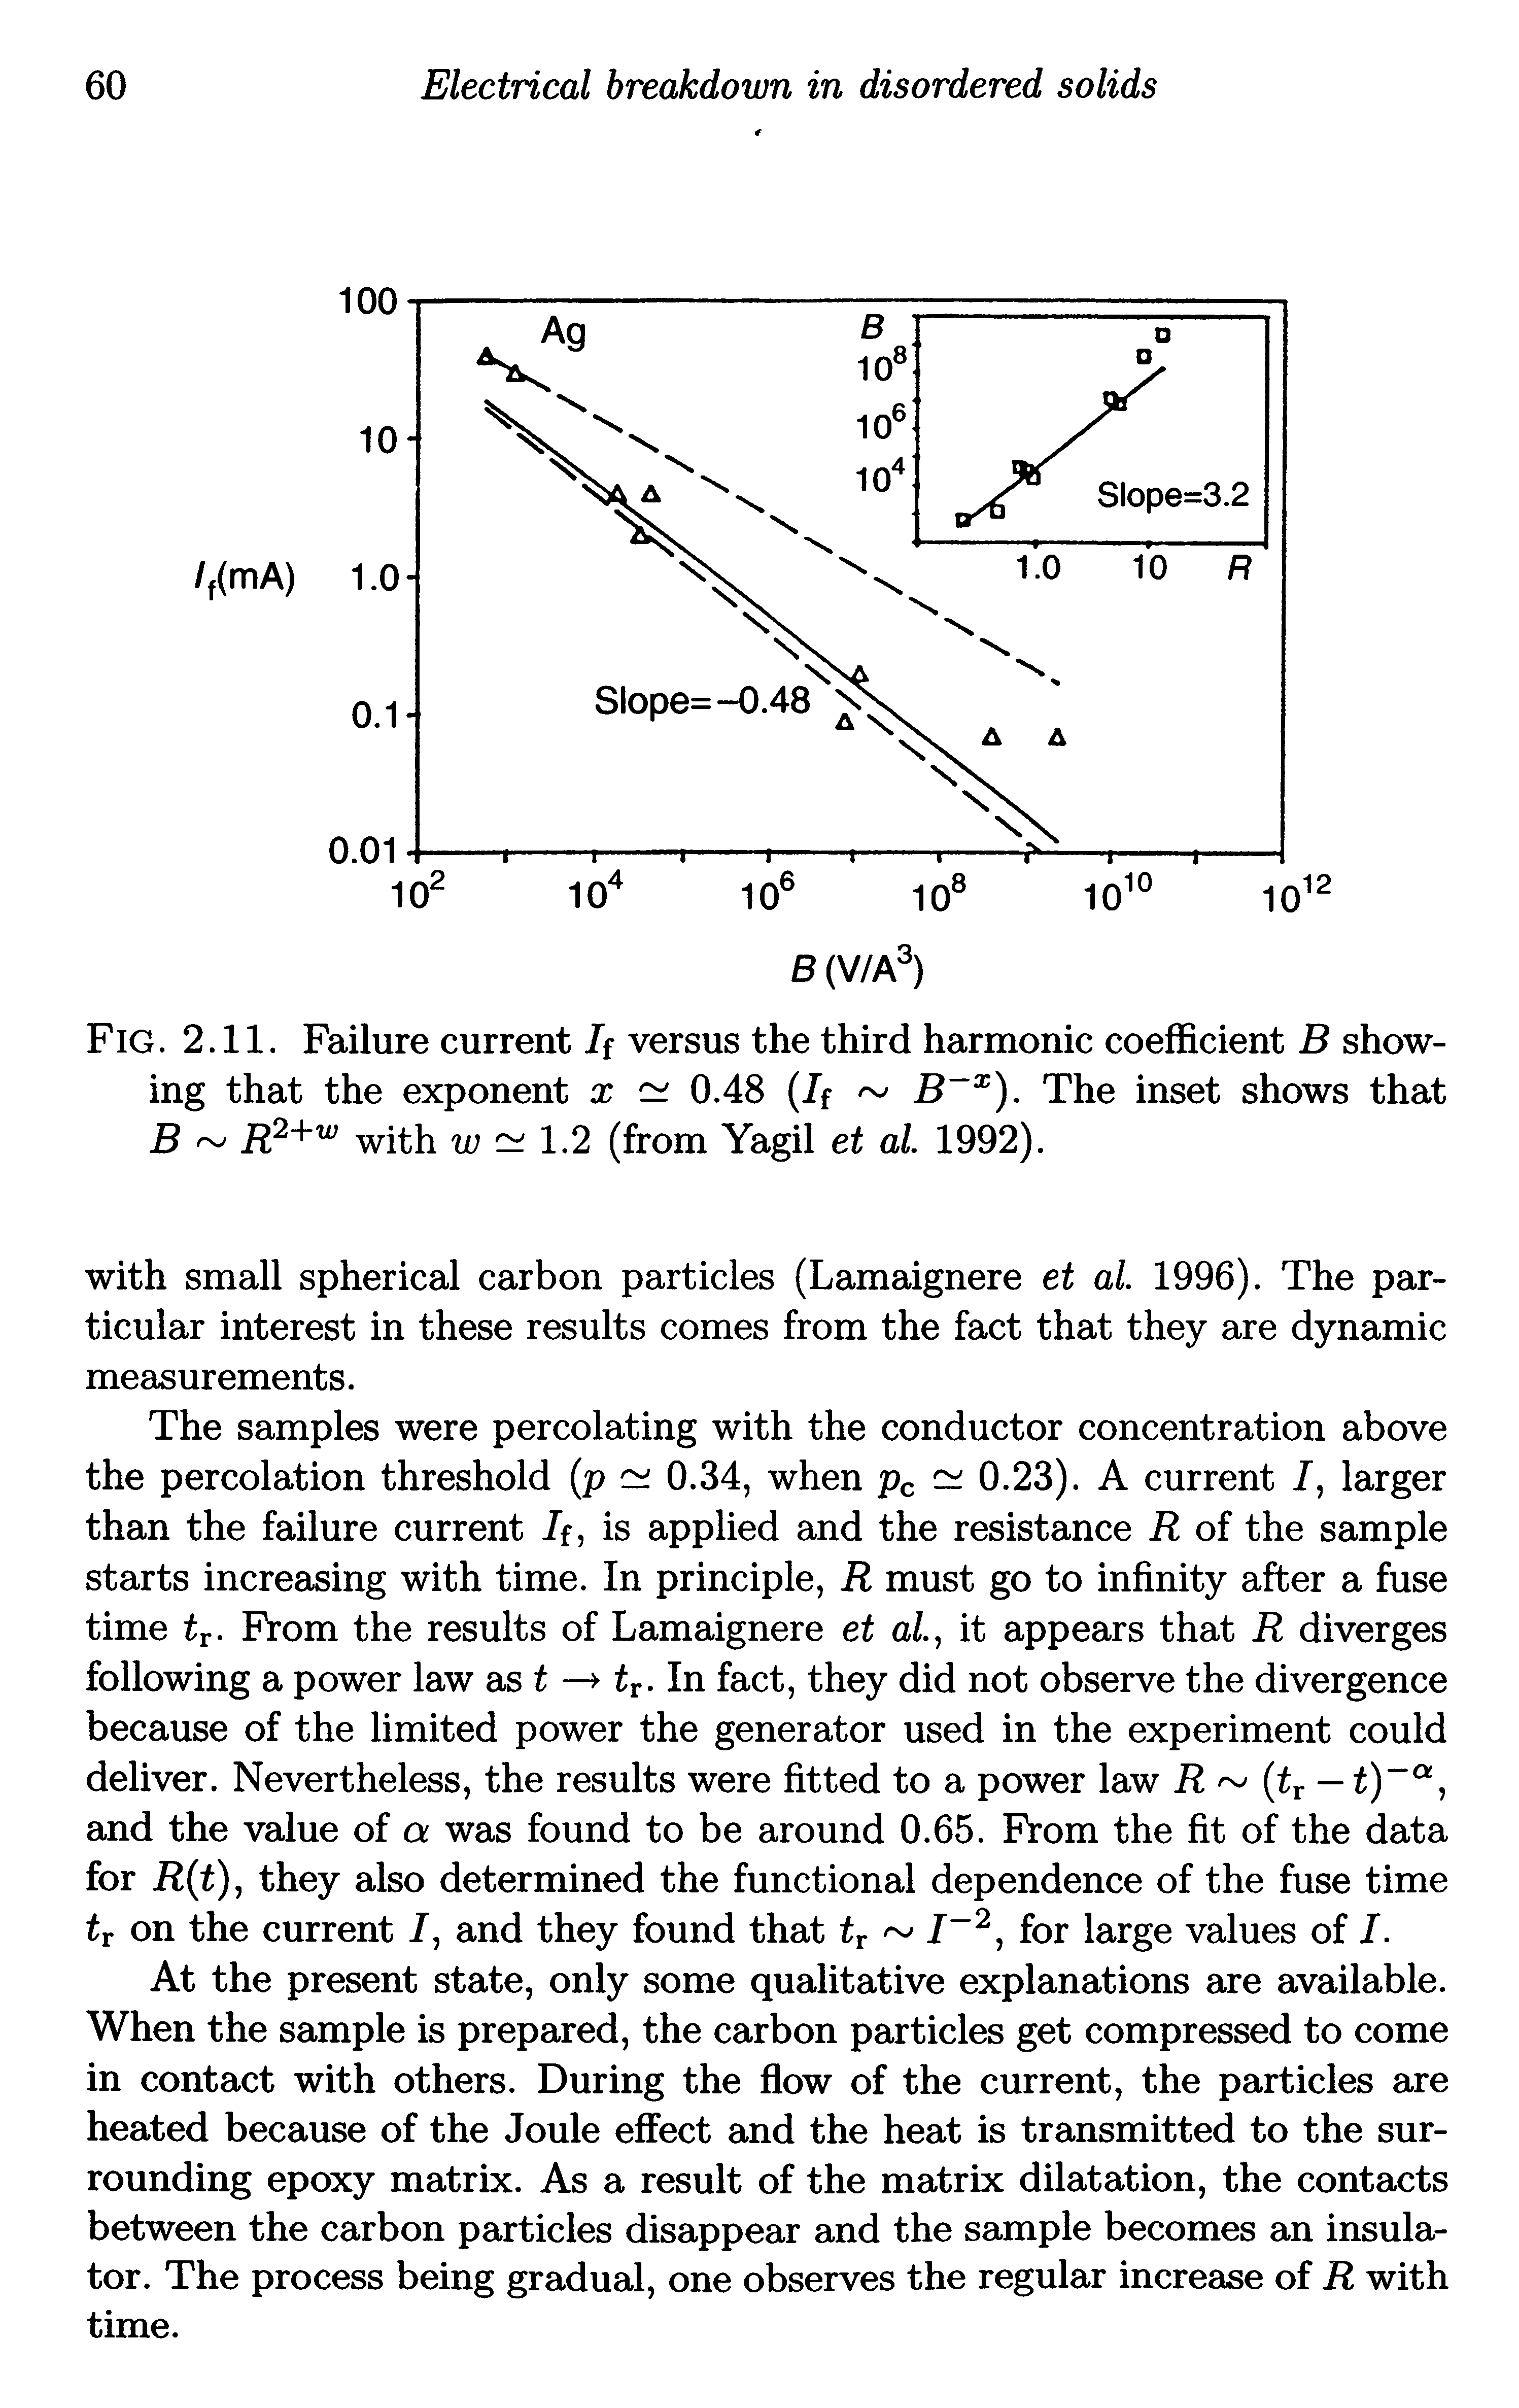 Fig. 2.11. Failure current If versus the third harmonic coefficient B showing that the exponent x 0.48 If B ). The inset shows that B with ty 1.2 (from Yagil et al 1992).